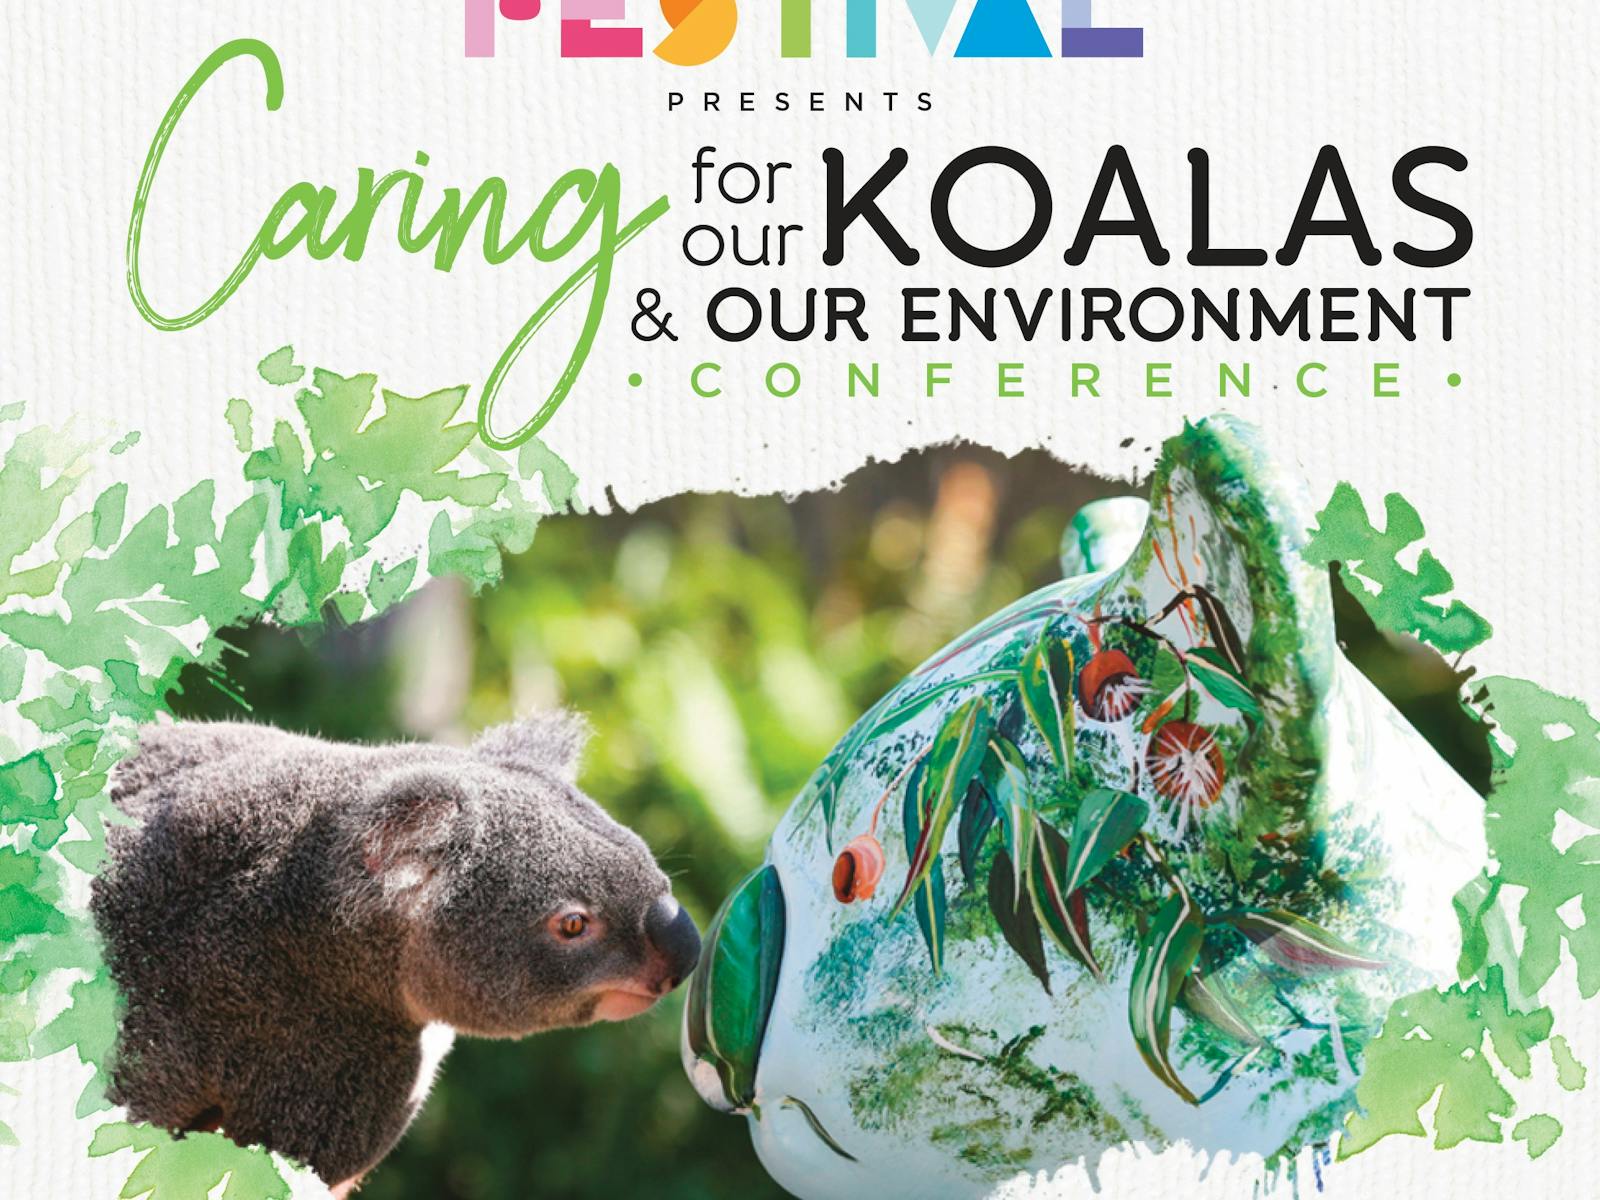 Image for Caring for our Koalas and our Environment Conference - Postponed